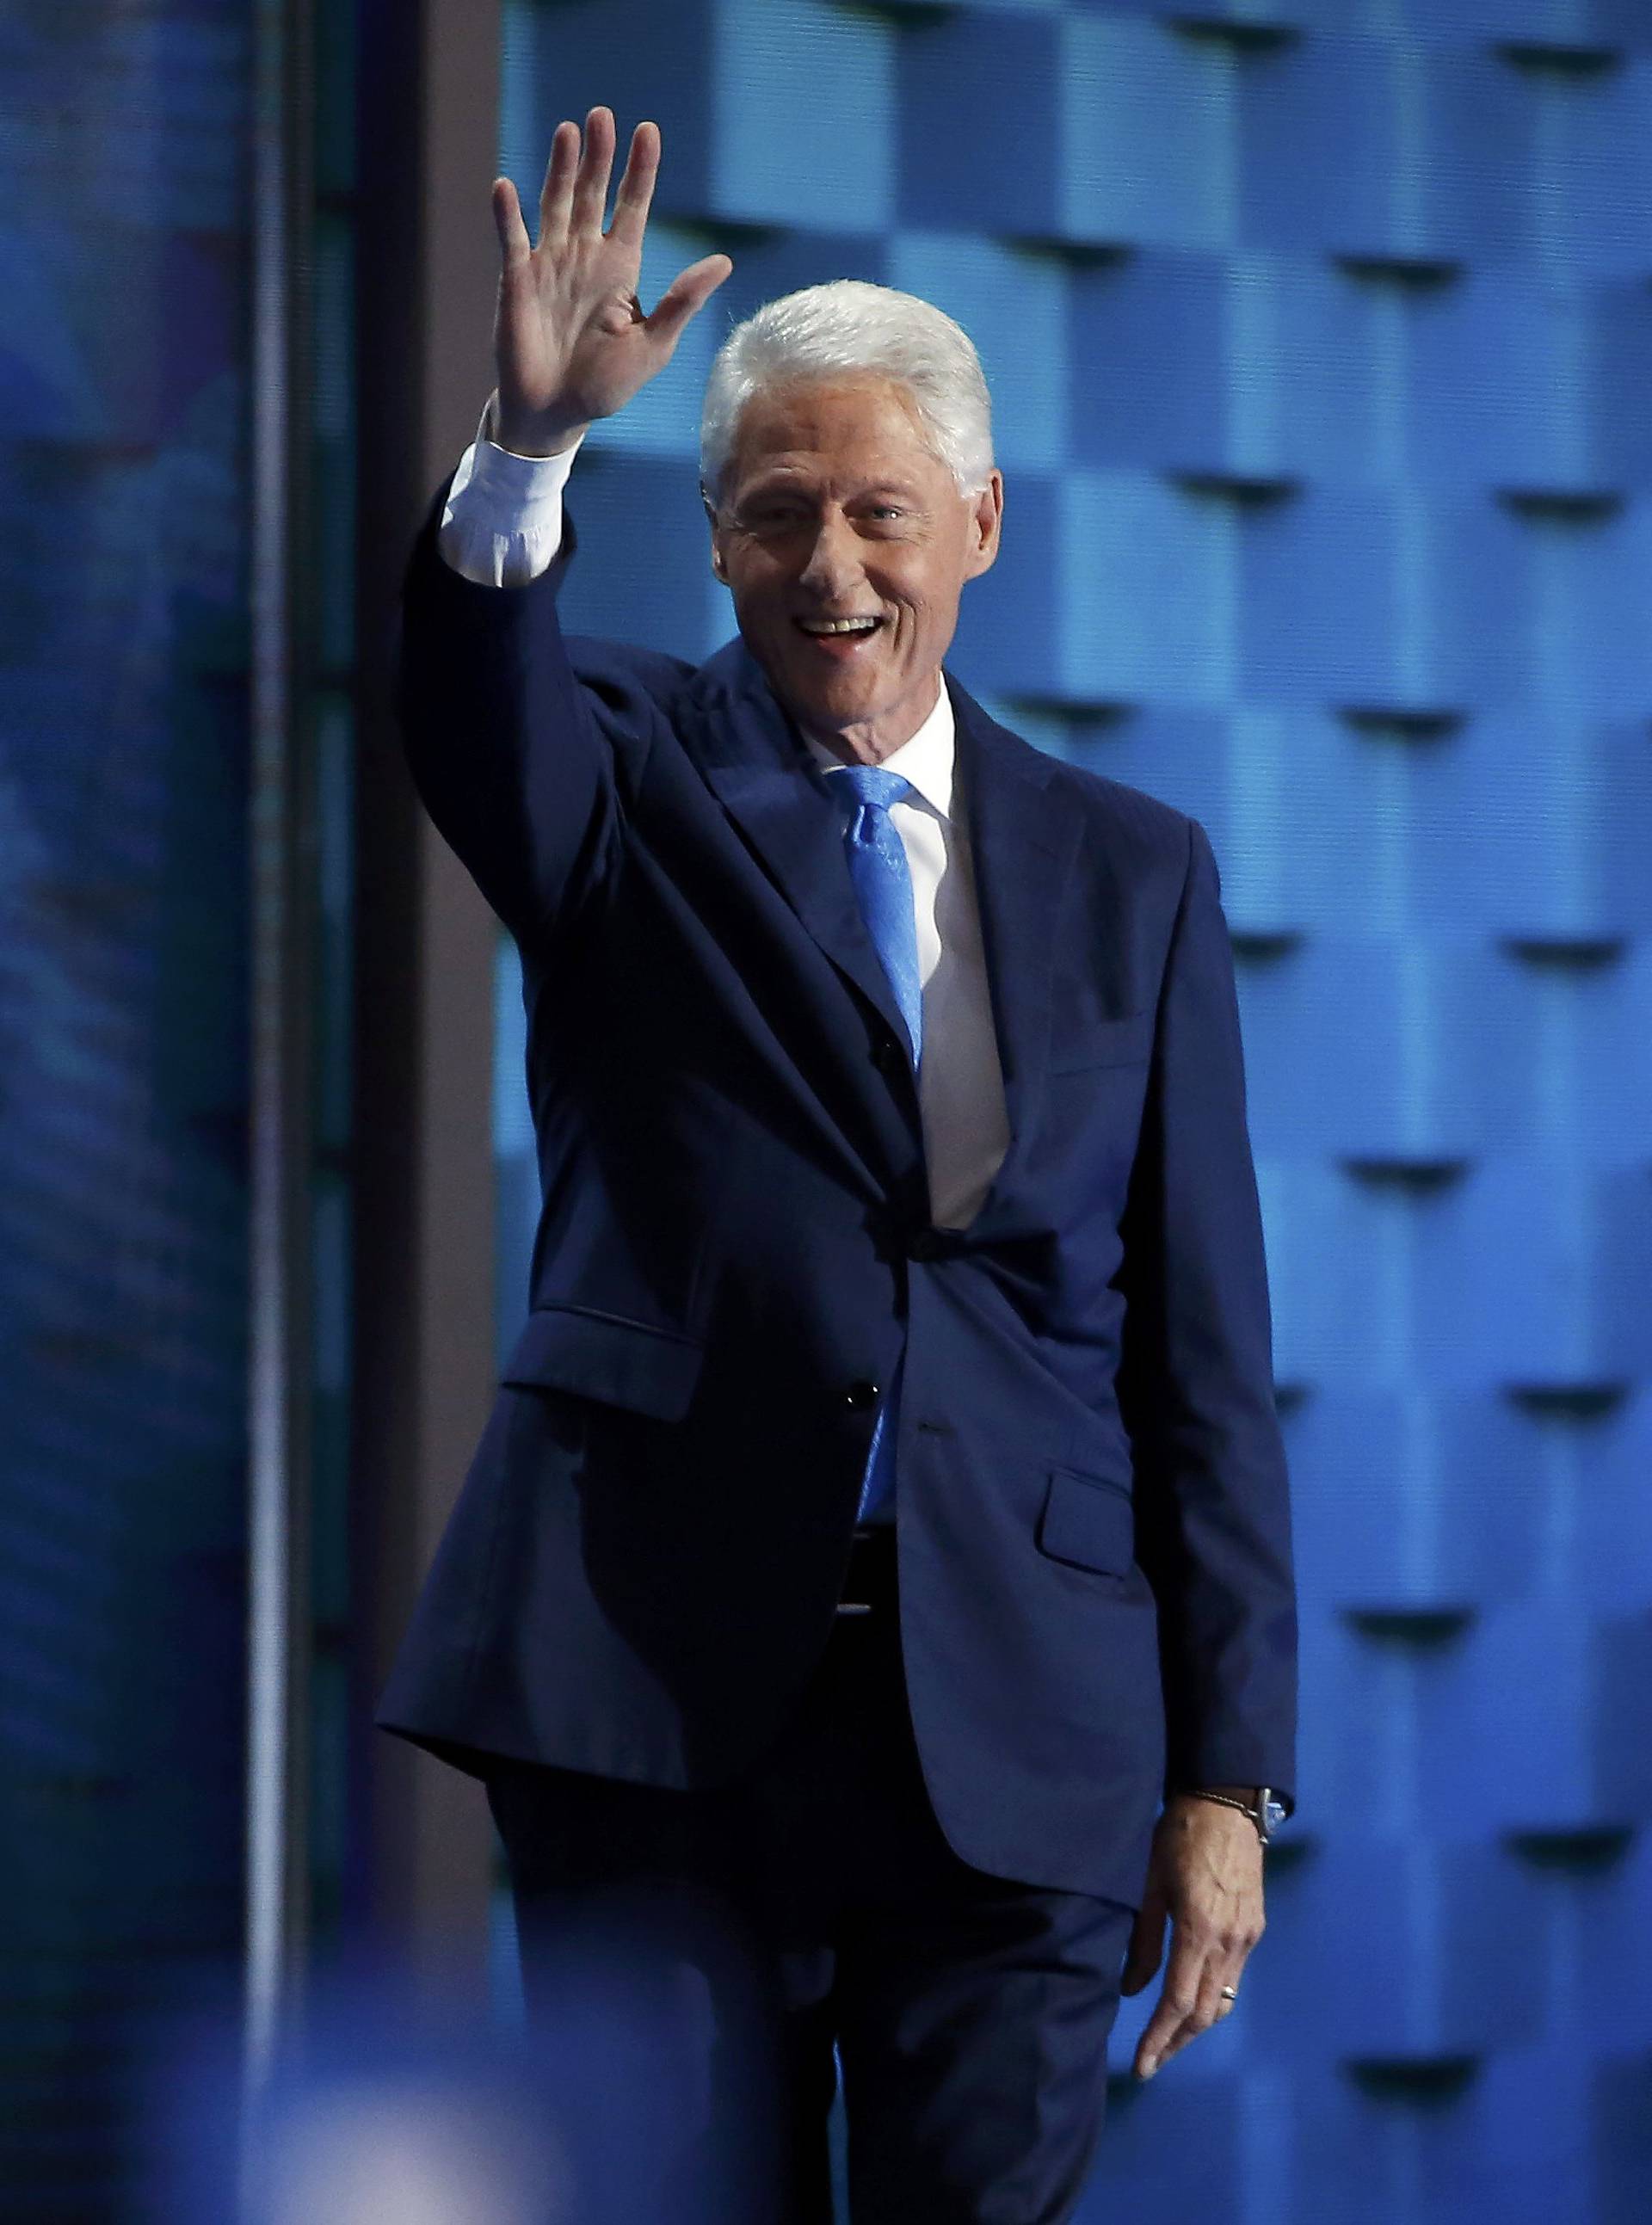 Bill Clinton takes the stage during the Democratic National Convention in Philadelphia